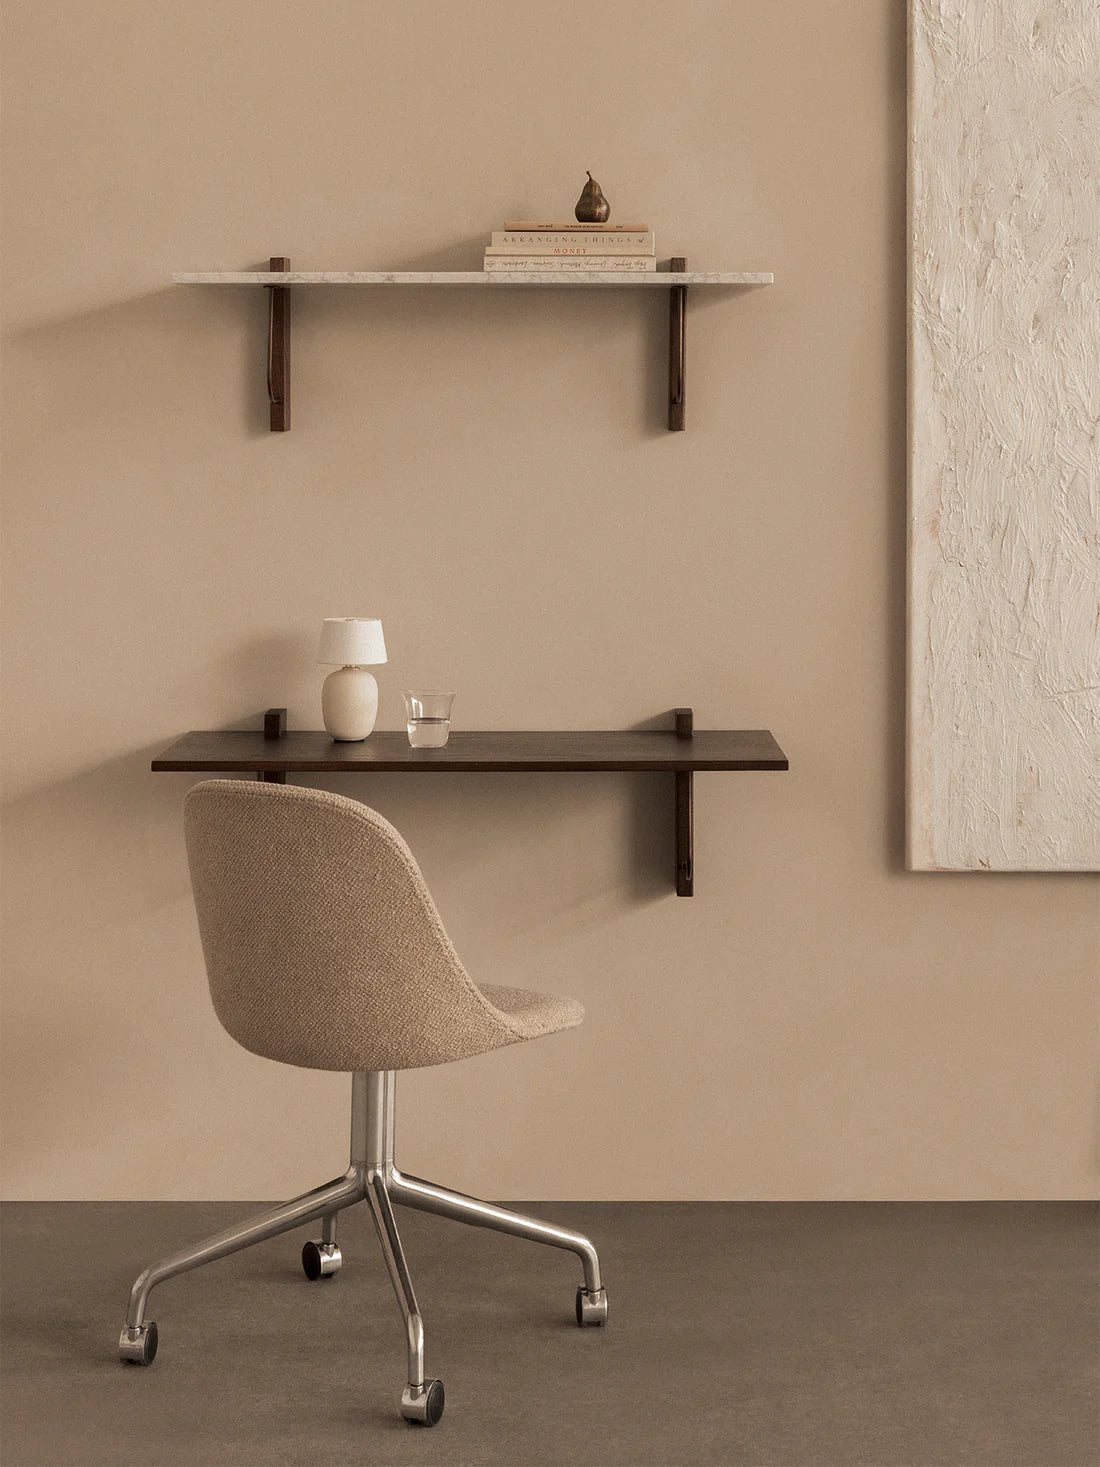 Corbel Wall Shelf in white marble and desk dark stained oak in office setting with desk chair